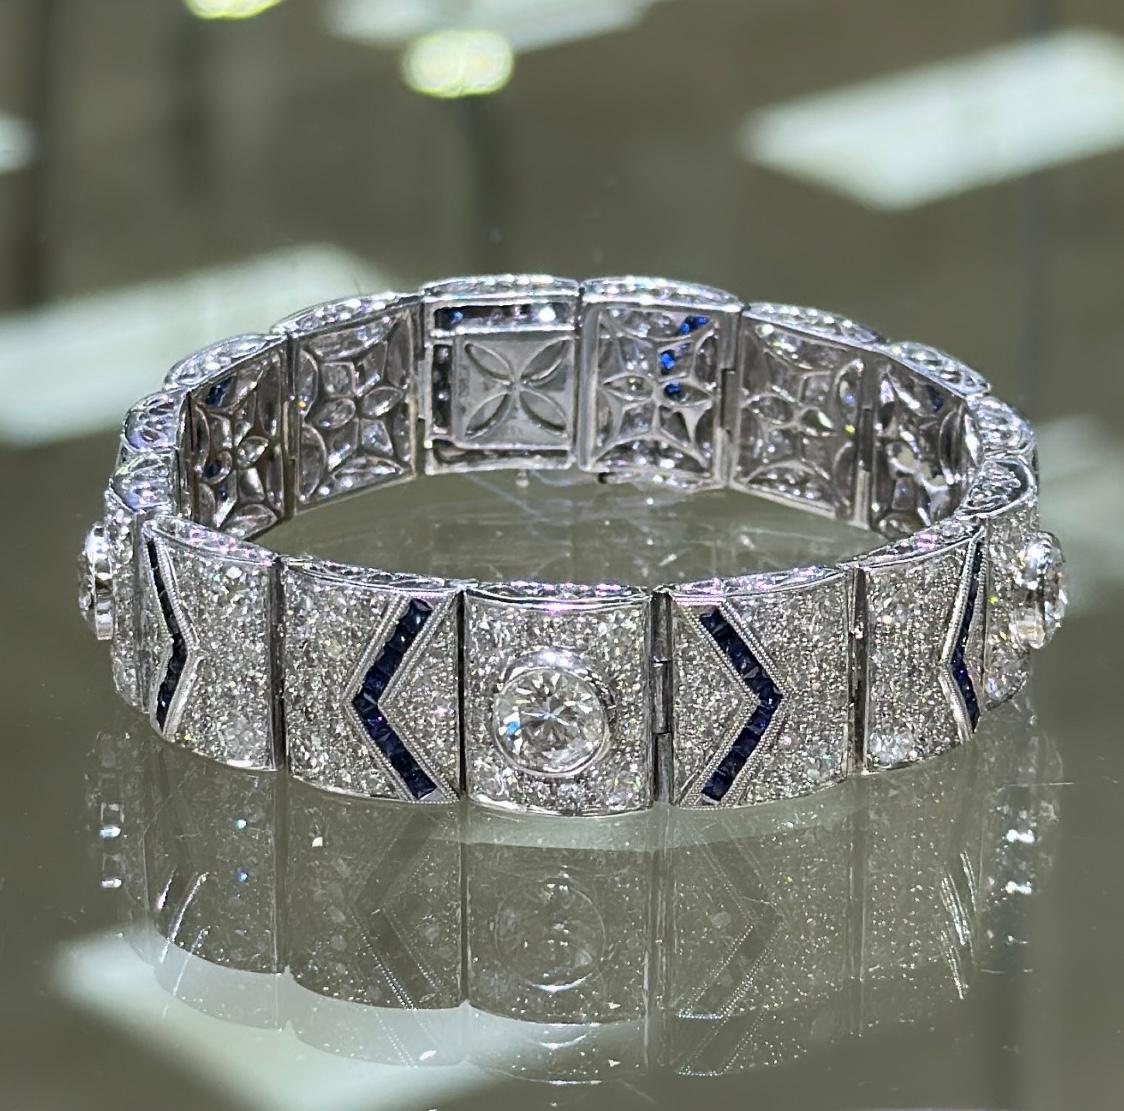 This bracelet is fit for a queen. 
Absolutely stunning white and blue sapphire diamond jewelry design that sparkles beautifully. It is made up of platinum.
Metal: Platinum
Diamond Weigh 308: 12.80ctw
Sapphire Weight 90: 3.37ctw
Bracelet Width: